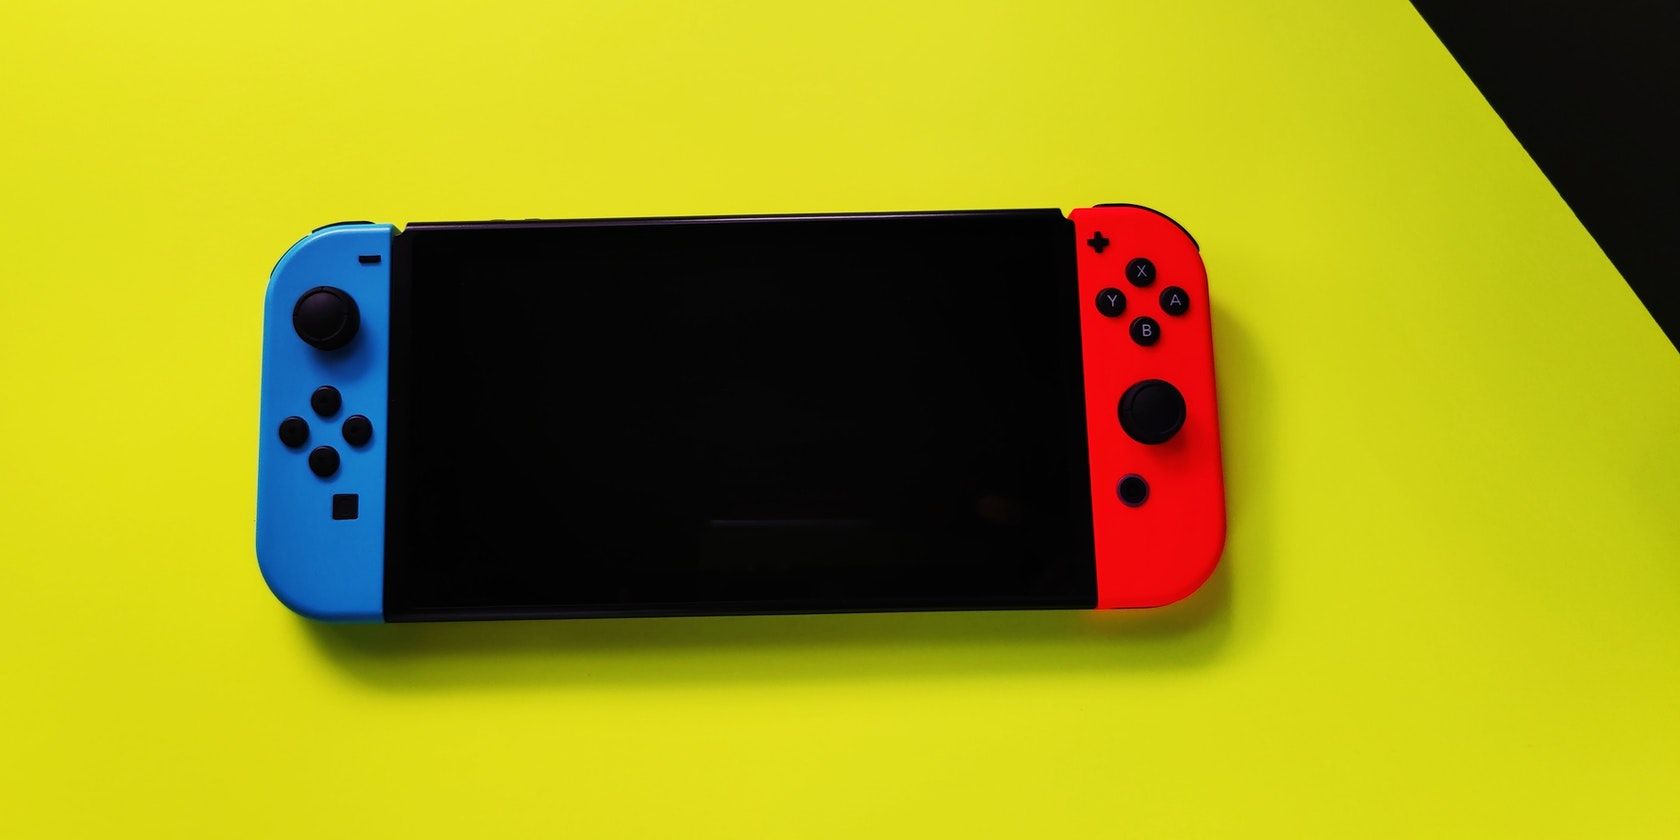 Nintendo Switch console with yellow background